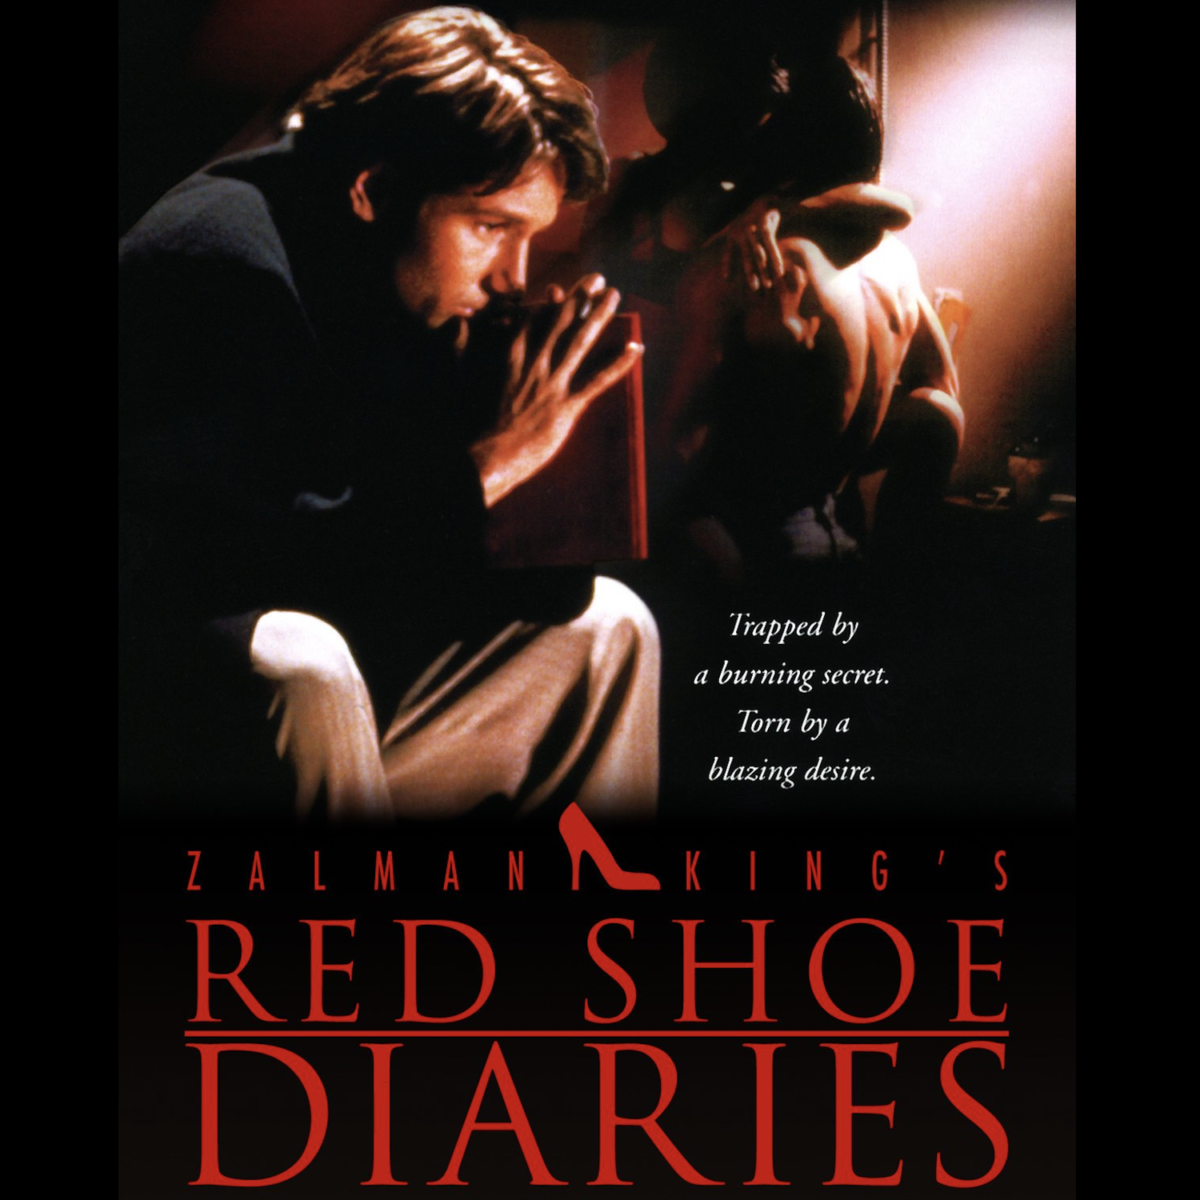 Red Shoe Diaries and Sex on TV in the 90s. (Erotic 90’s,
Part 9)